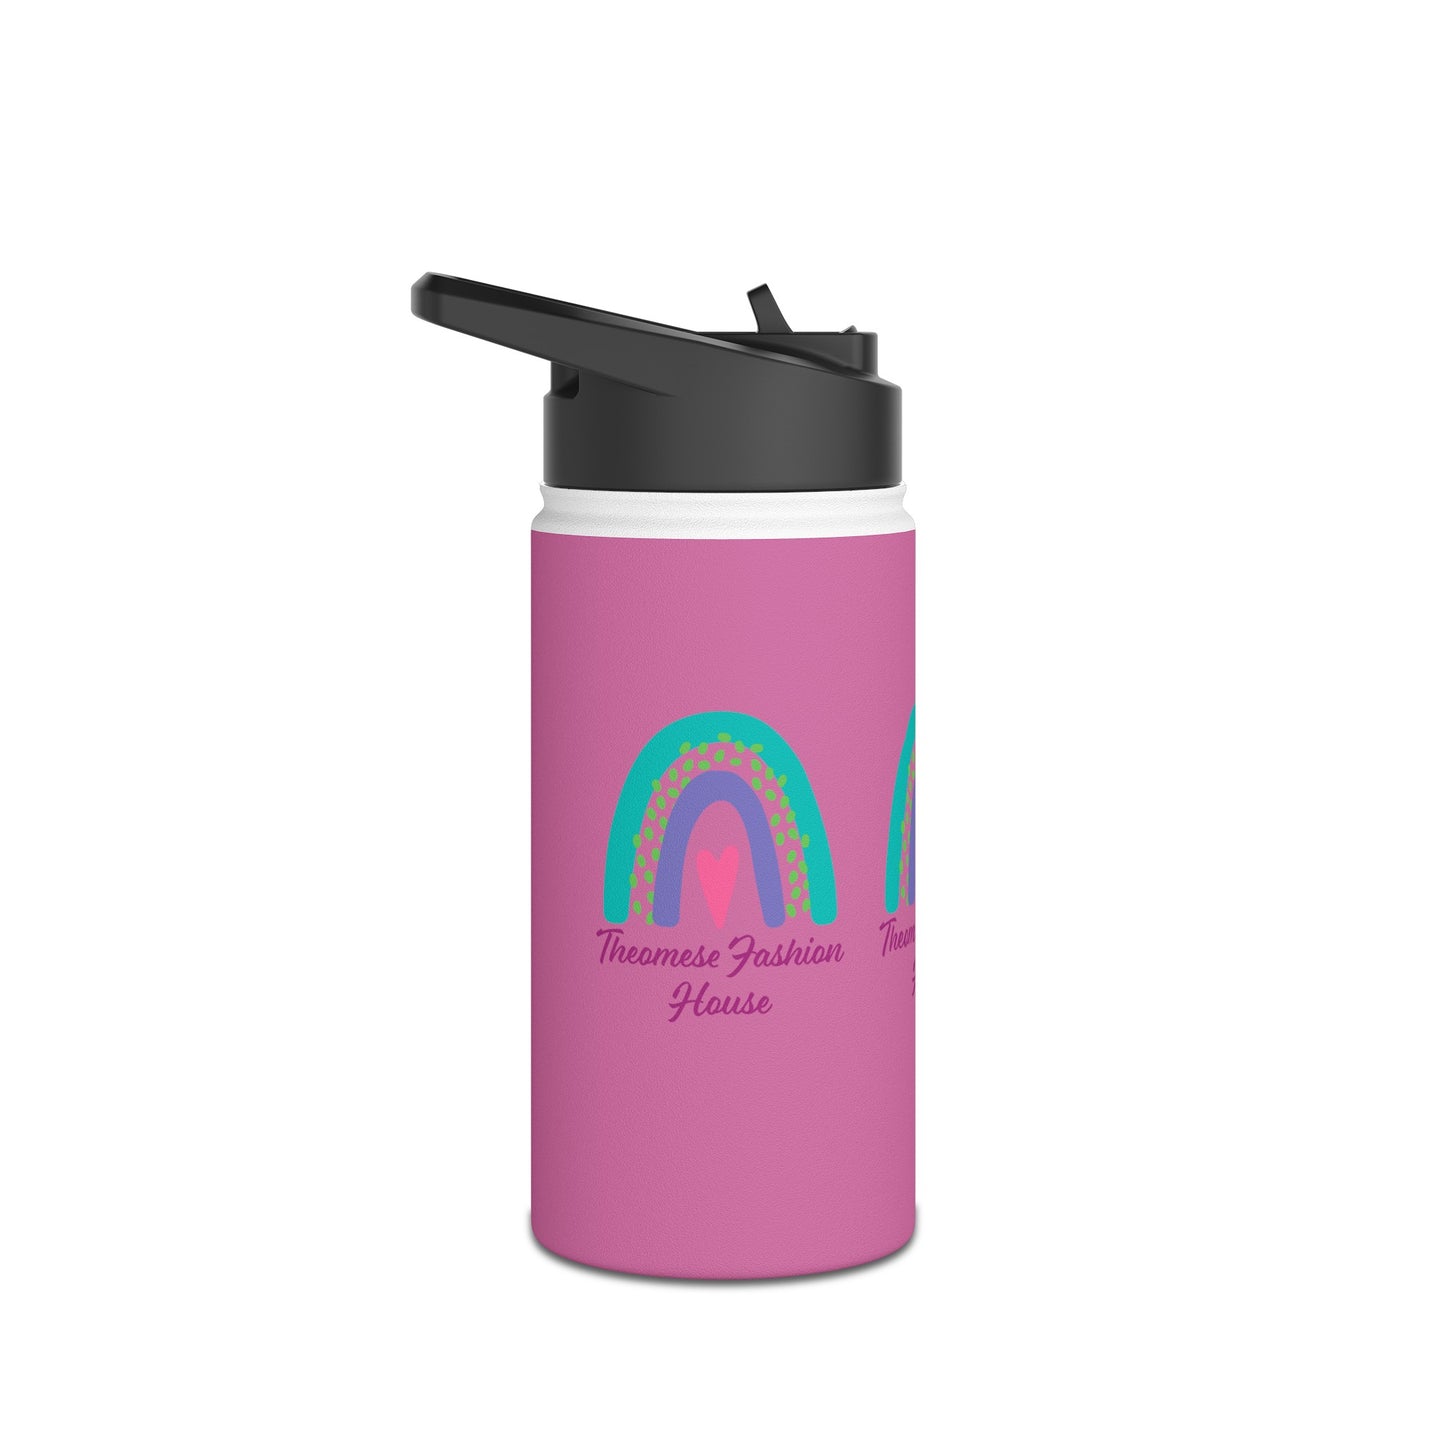 Signature-Stainless Steel Water Bottle, Standard Lid(Multi-Color)